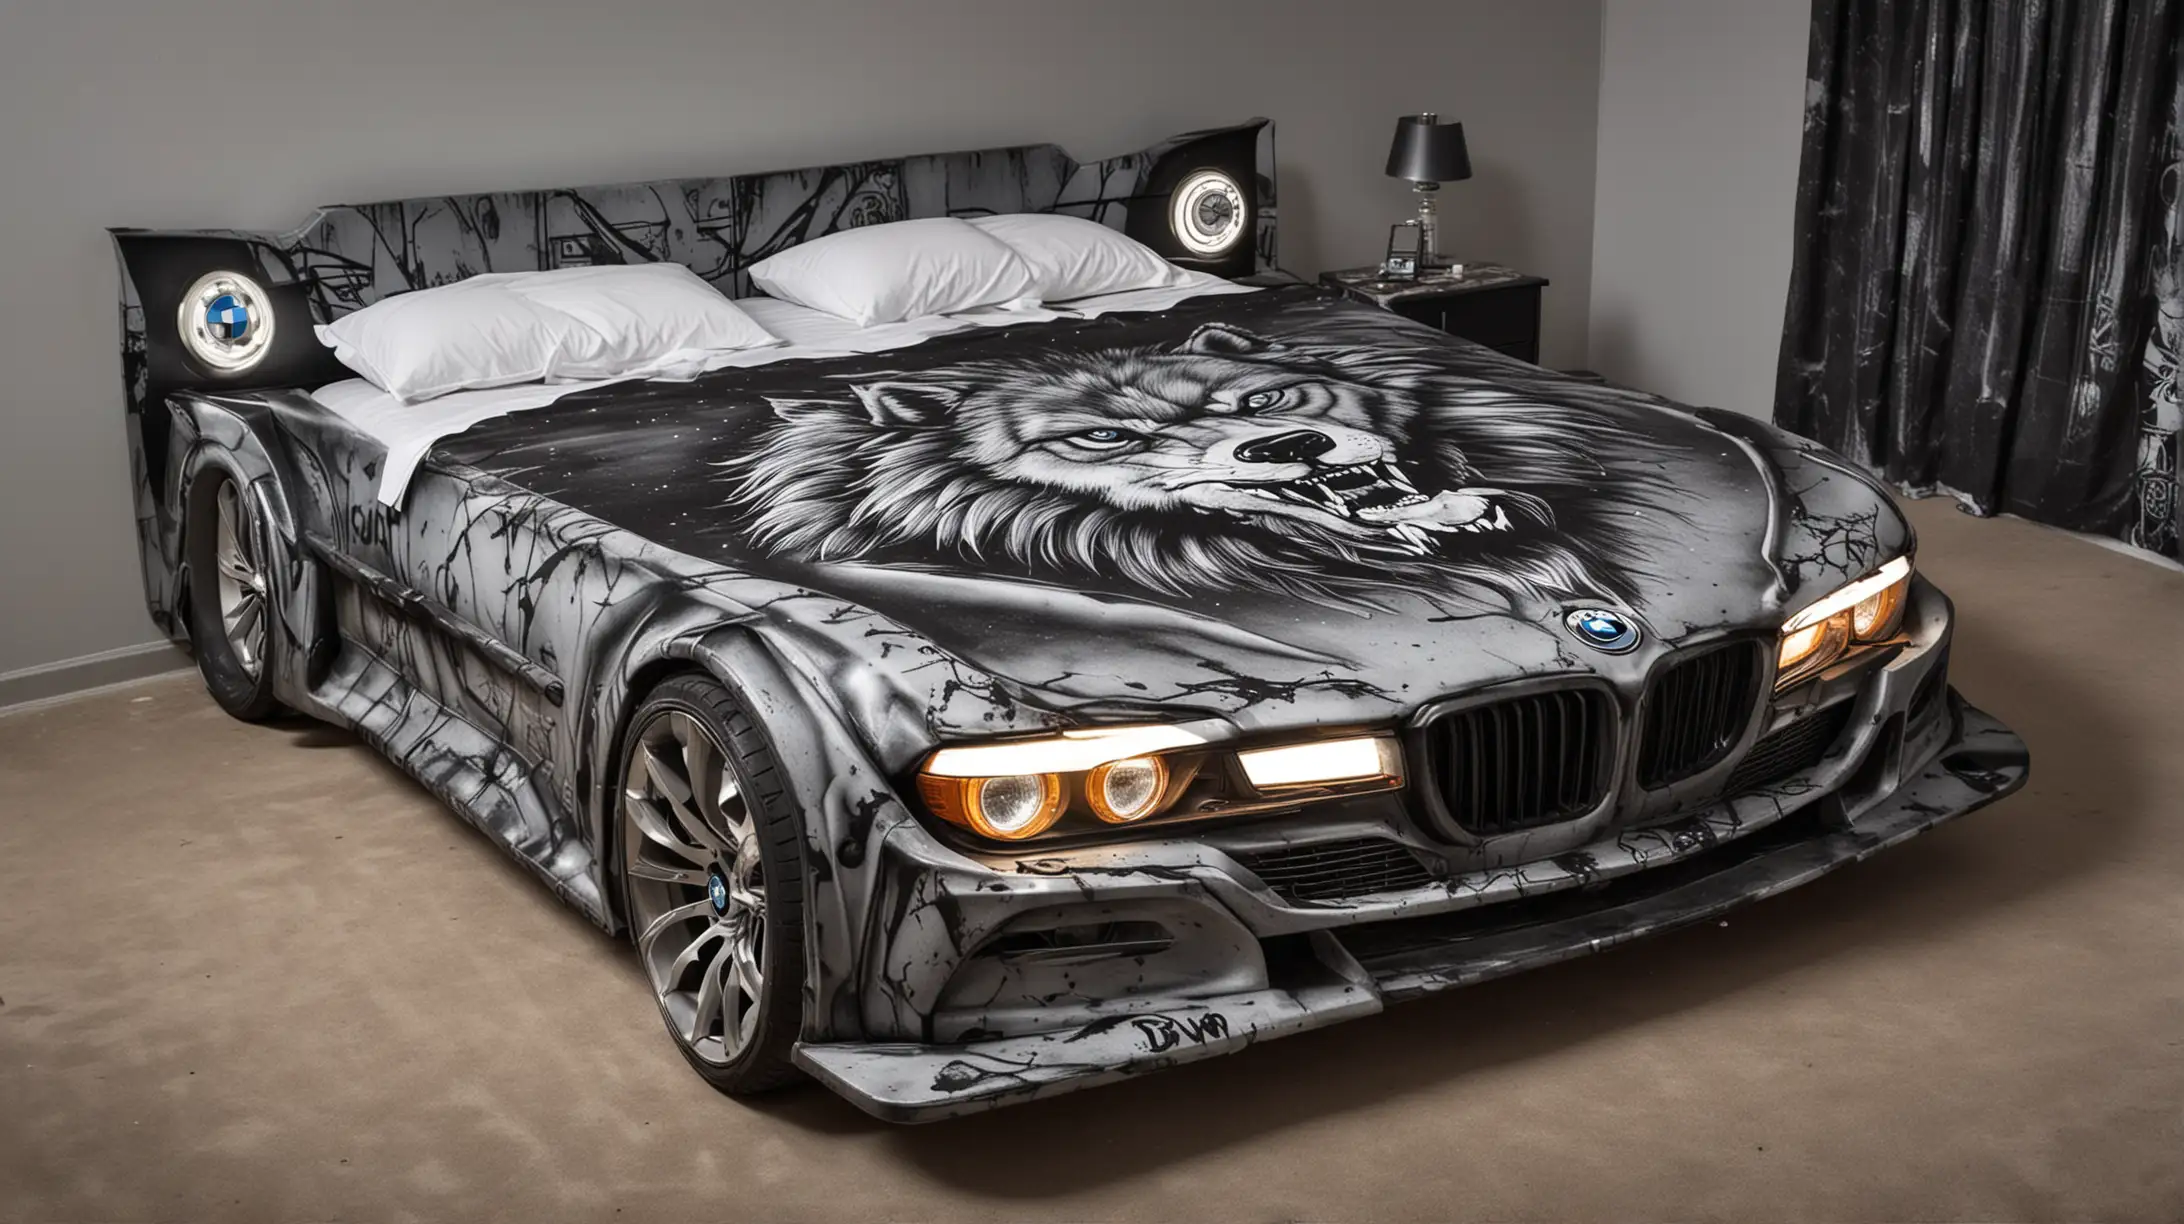 Double bed in the shape of a BMW car with headlights on with evil wolf graphitti